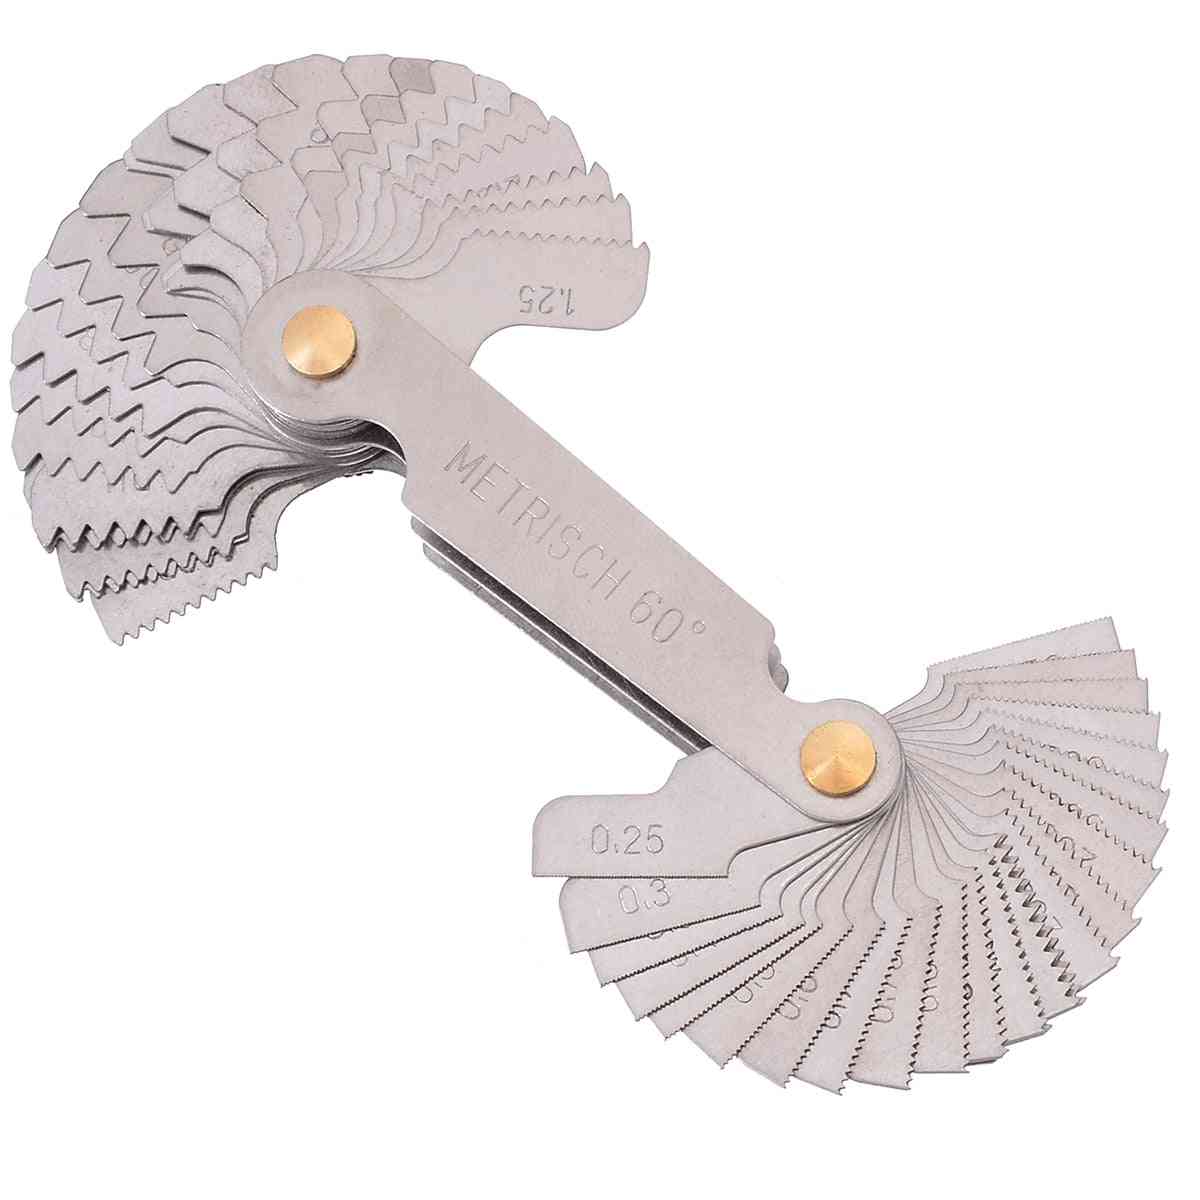 Whitworth Metric Screw Thread Pitch Gauge Blade For Measuring Tool